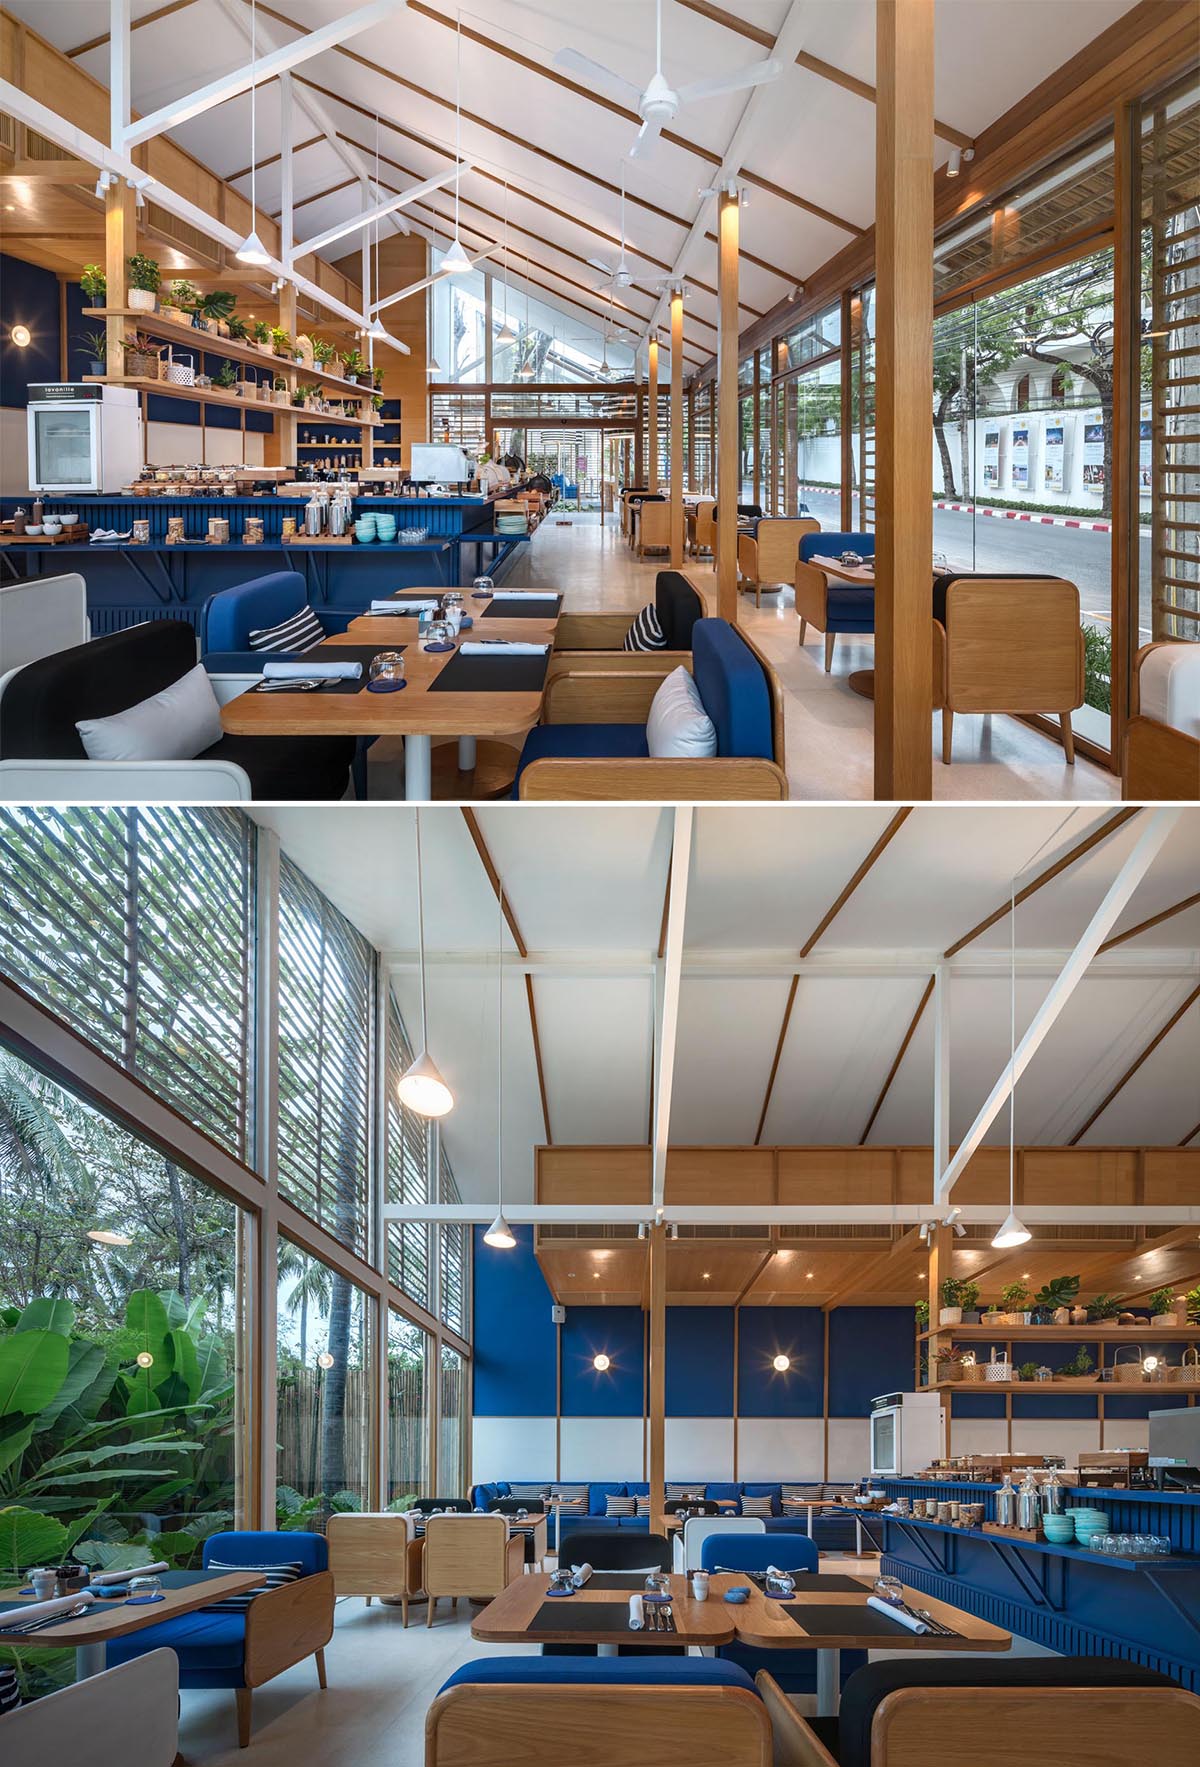 A modern hotel restaurant with blue, white, and wood color scheme.